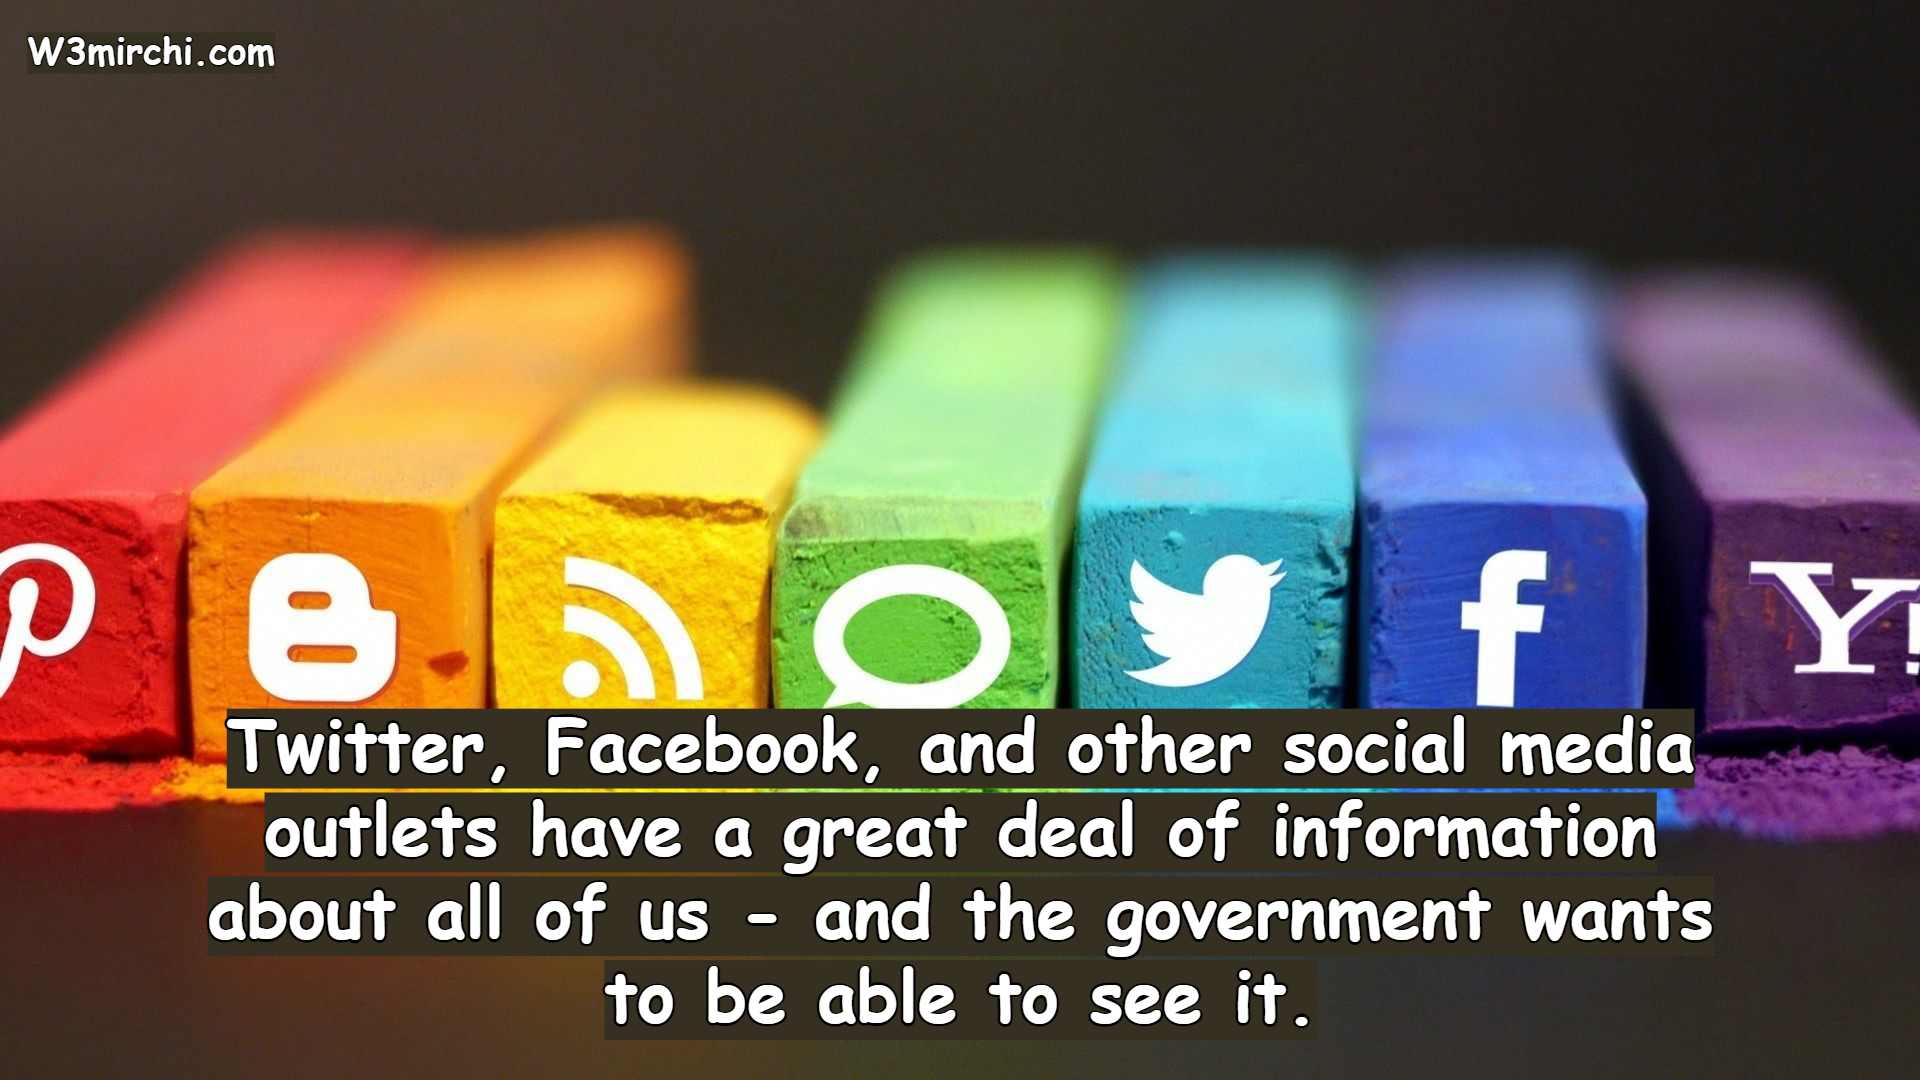 Twitter, Facebook, and other social media